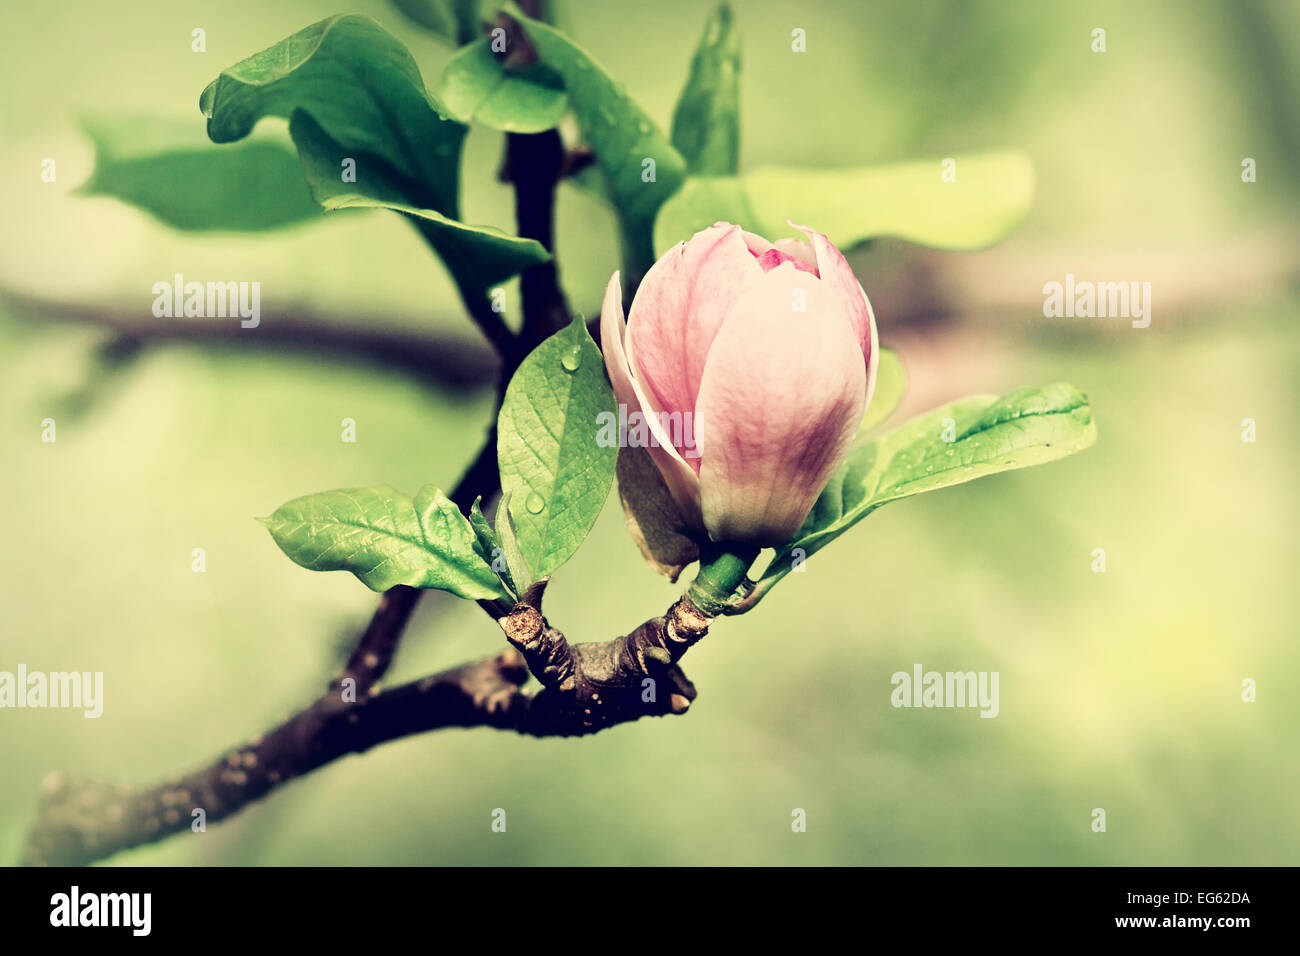 A Bud Of Magnolia Just Ready To Burst, Spring Background Stock